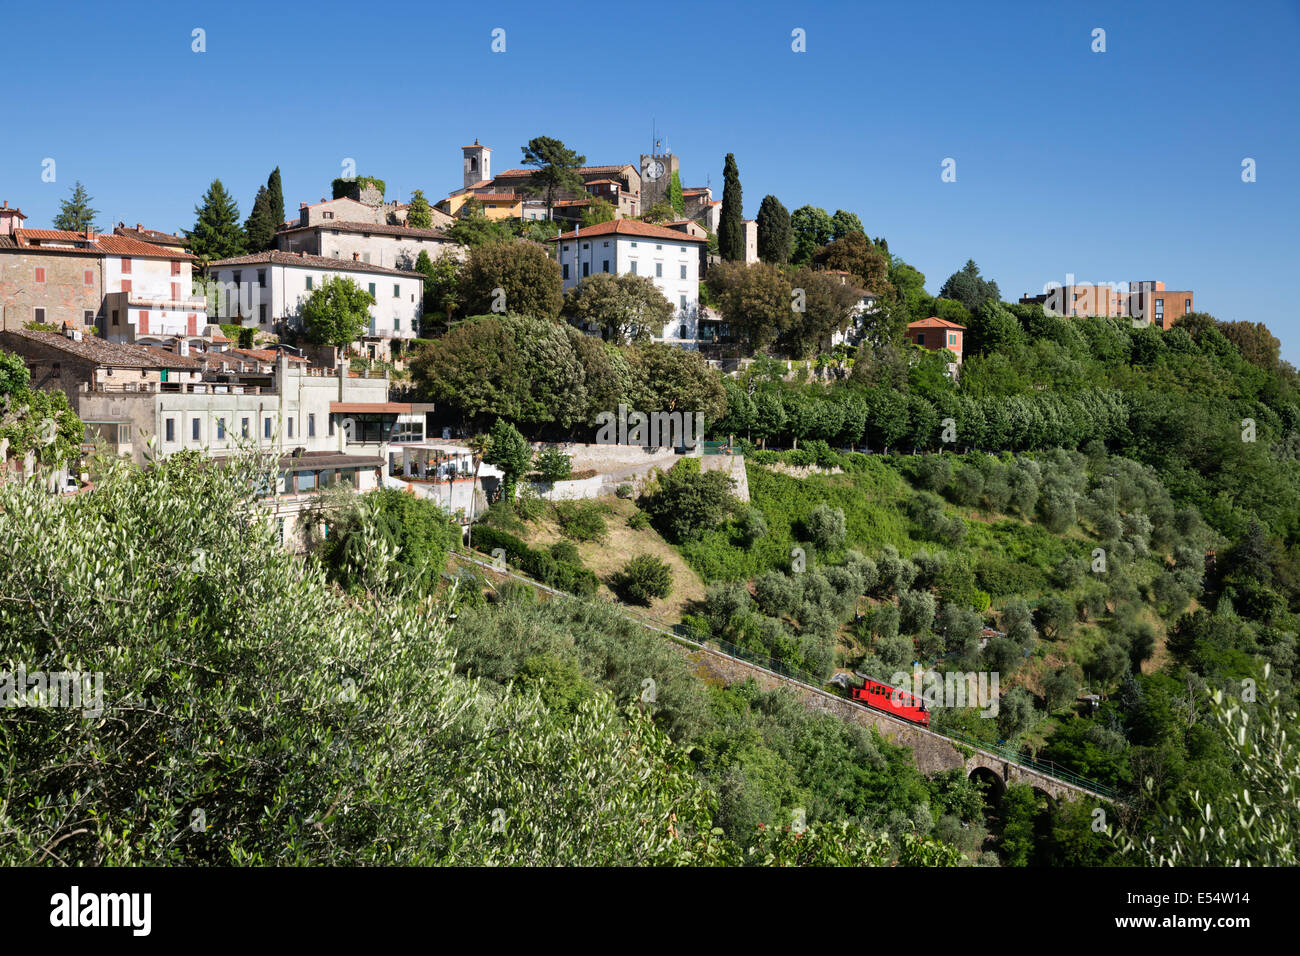 Funicular below hill top town, Montecatini Alto, Tuscany, Italy, Europe Stock Photo